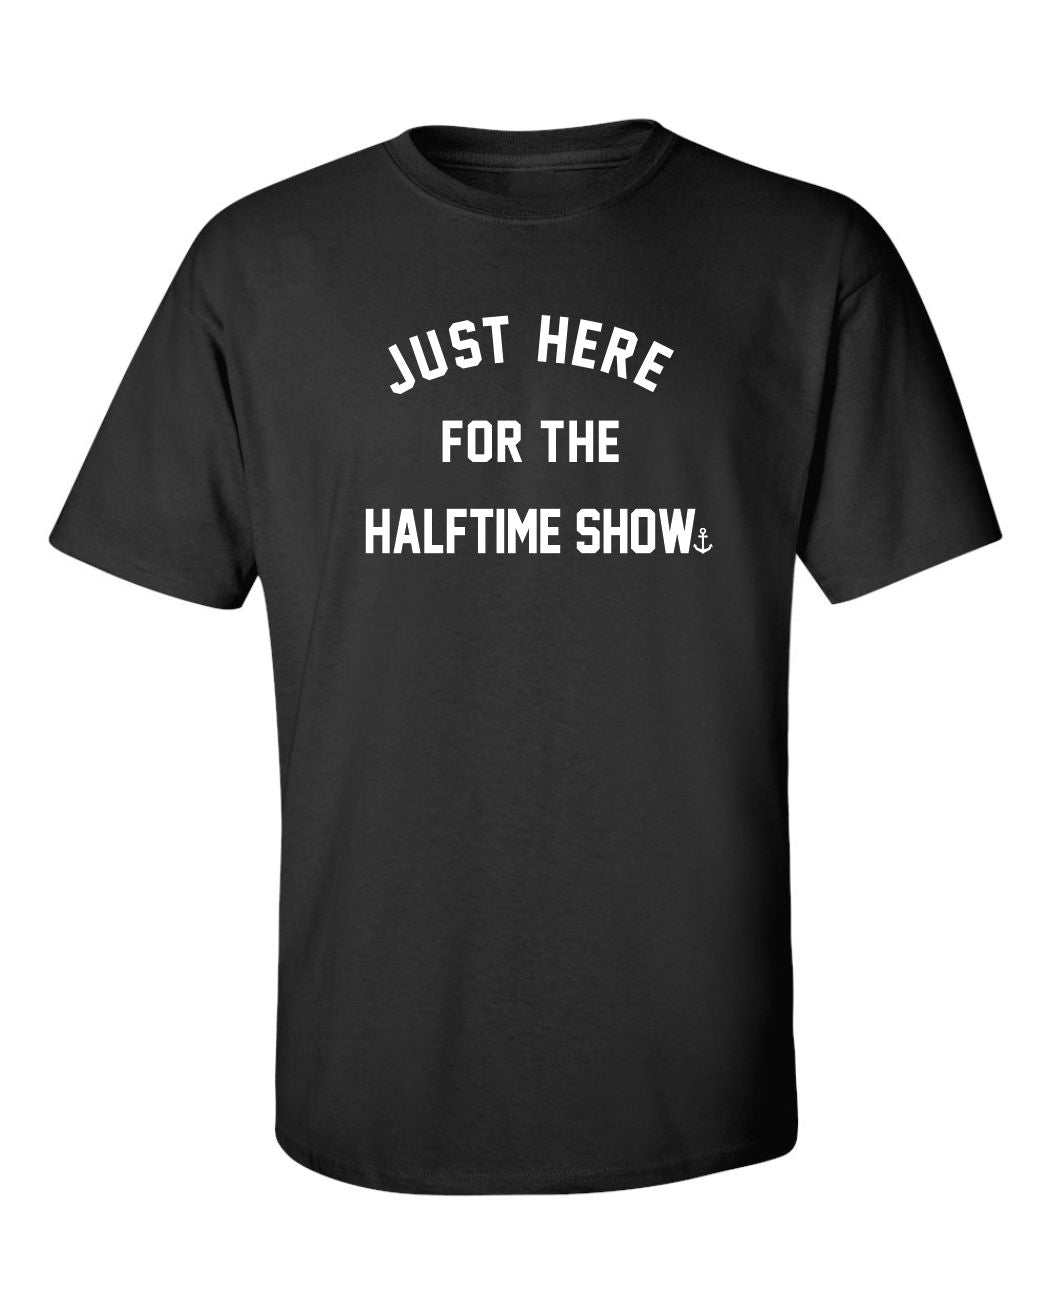 "Just Here For The Halftime Show" T-Shirt